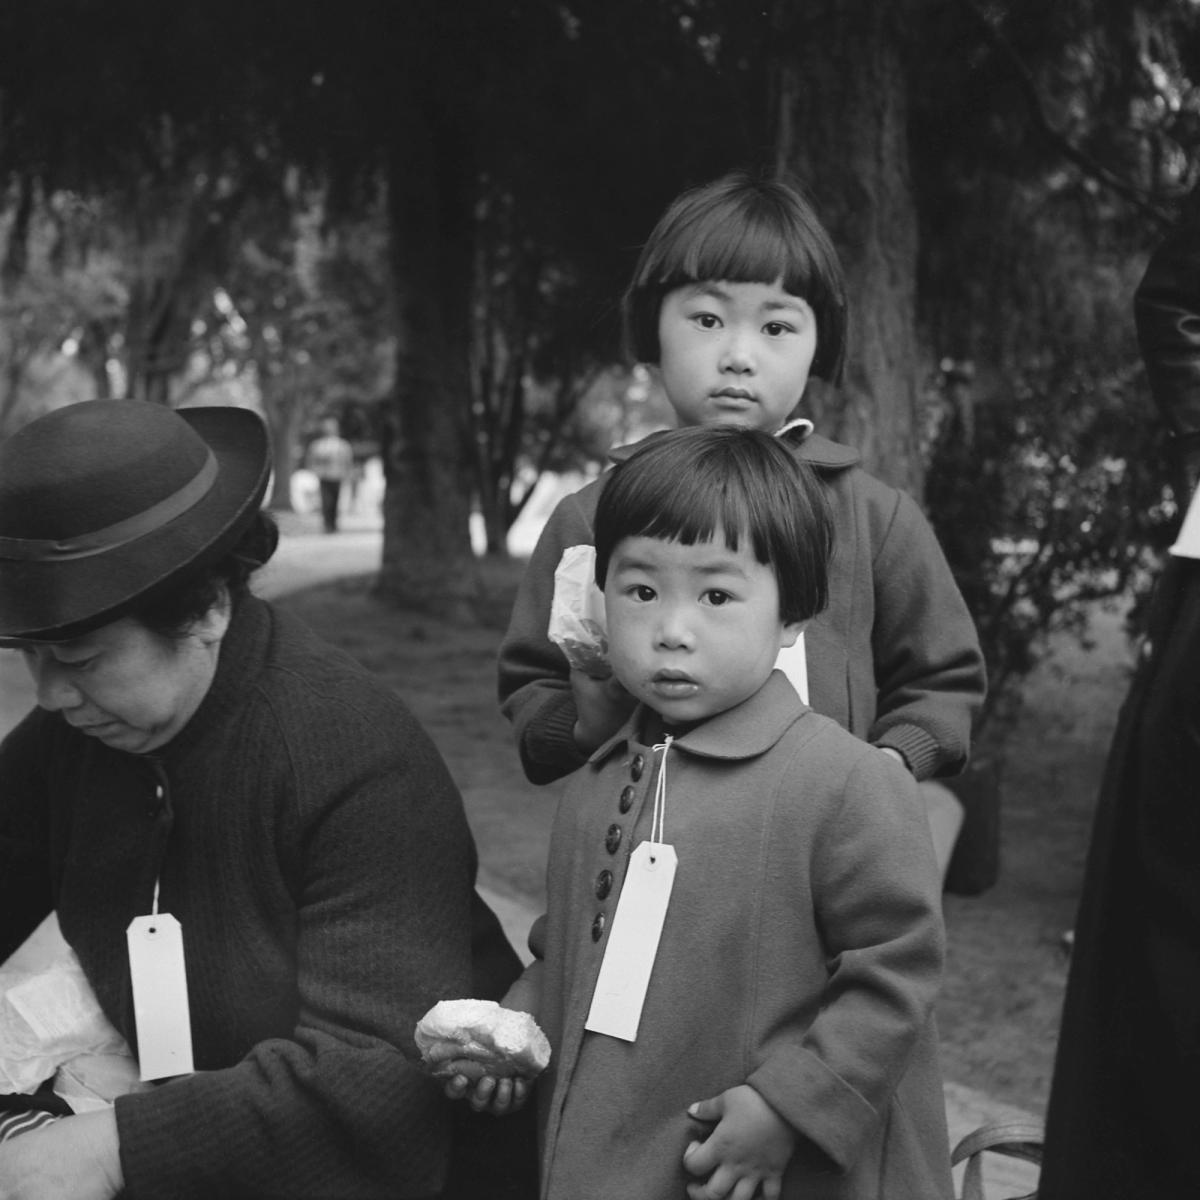 Dorothea Lange, Hayward, California – Two children of the Mochida family who, with their parents, are awaiting forced evacuation (1942).
Archival inkjet print, printed 2022. Courtesy of the Library of Congress, Washington, DC.